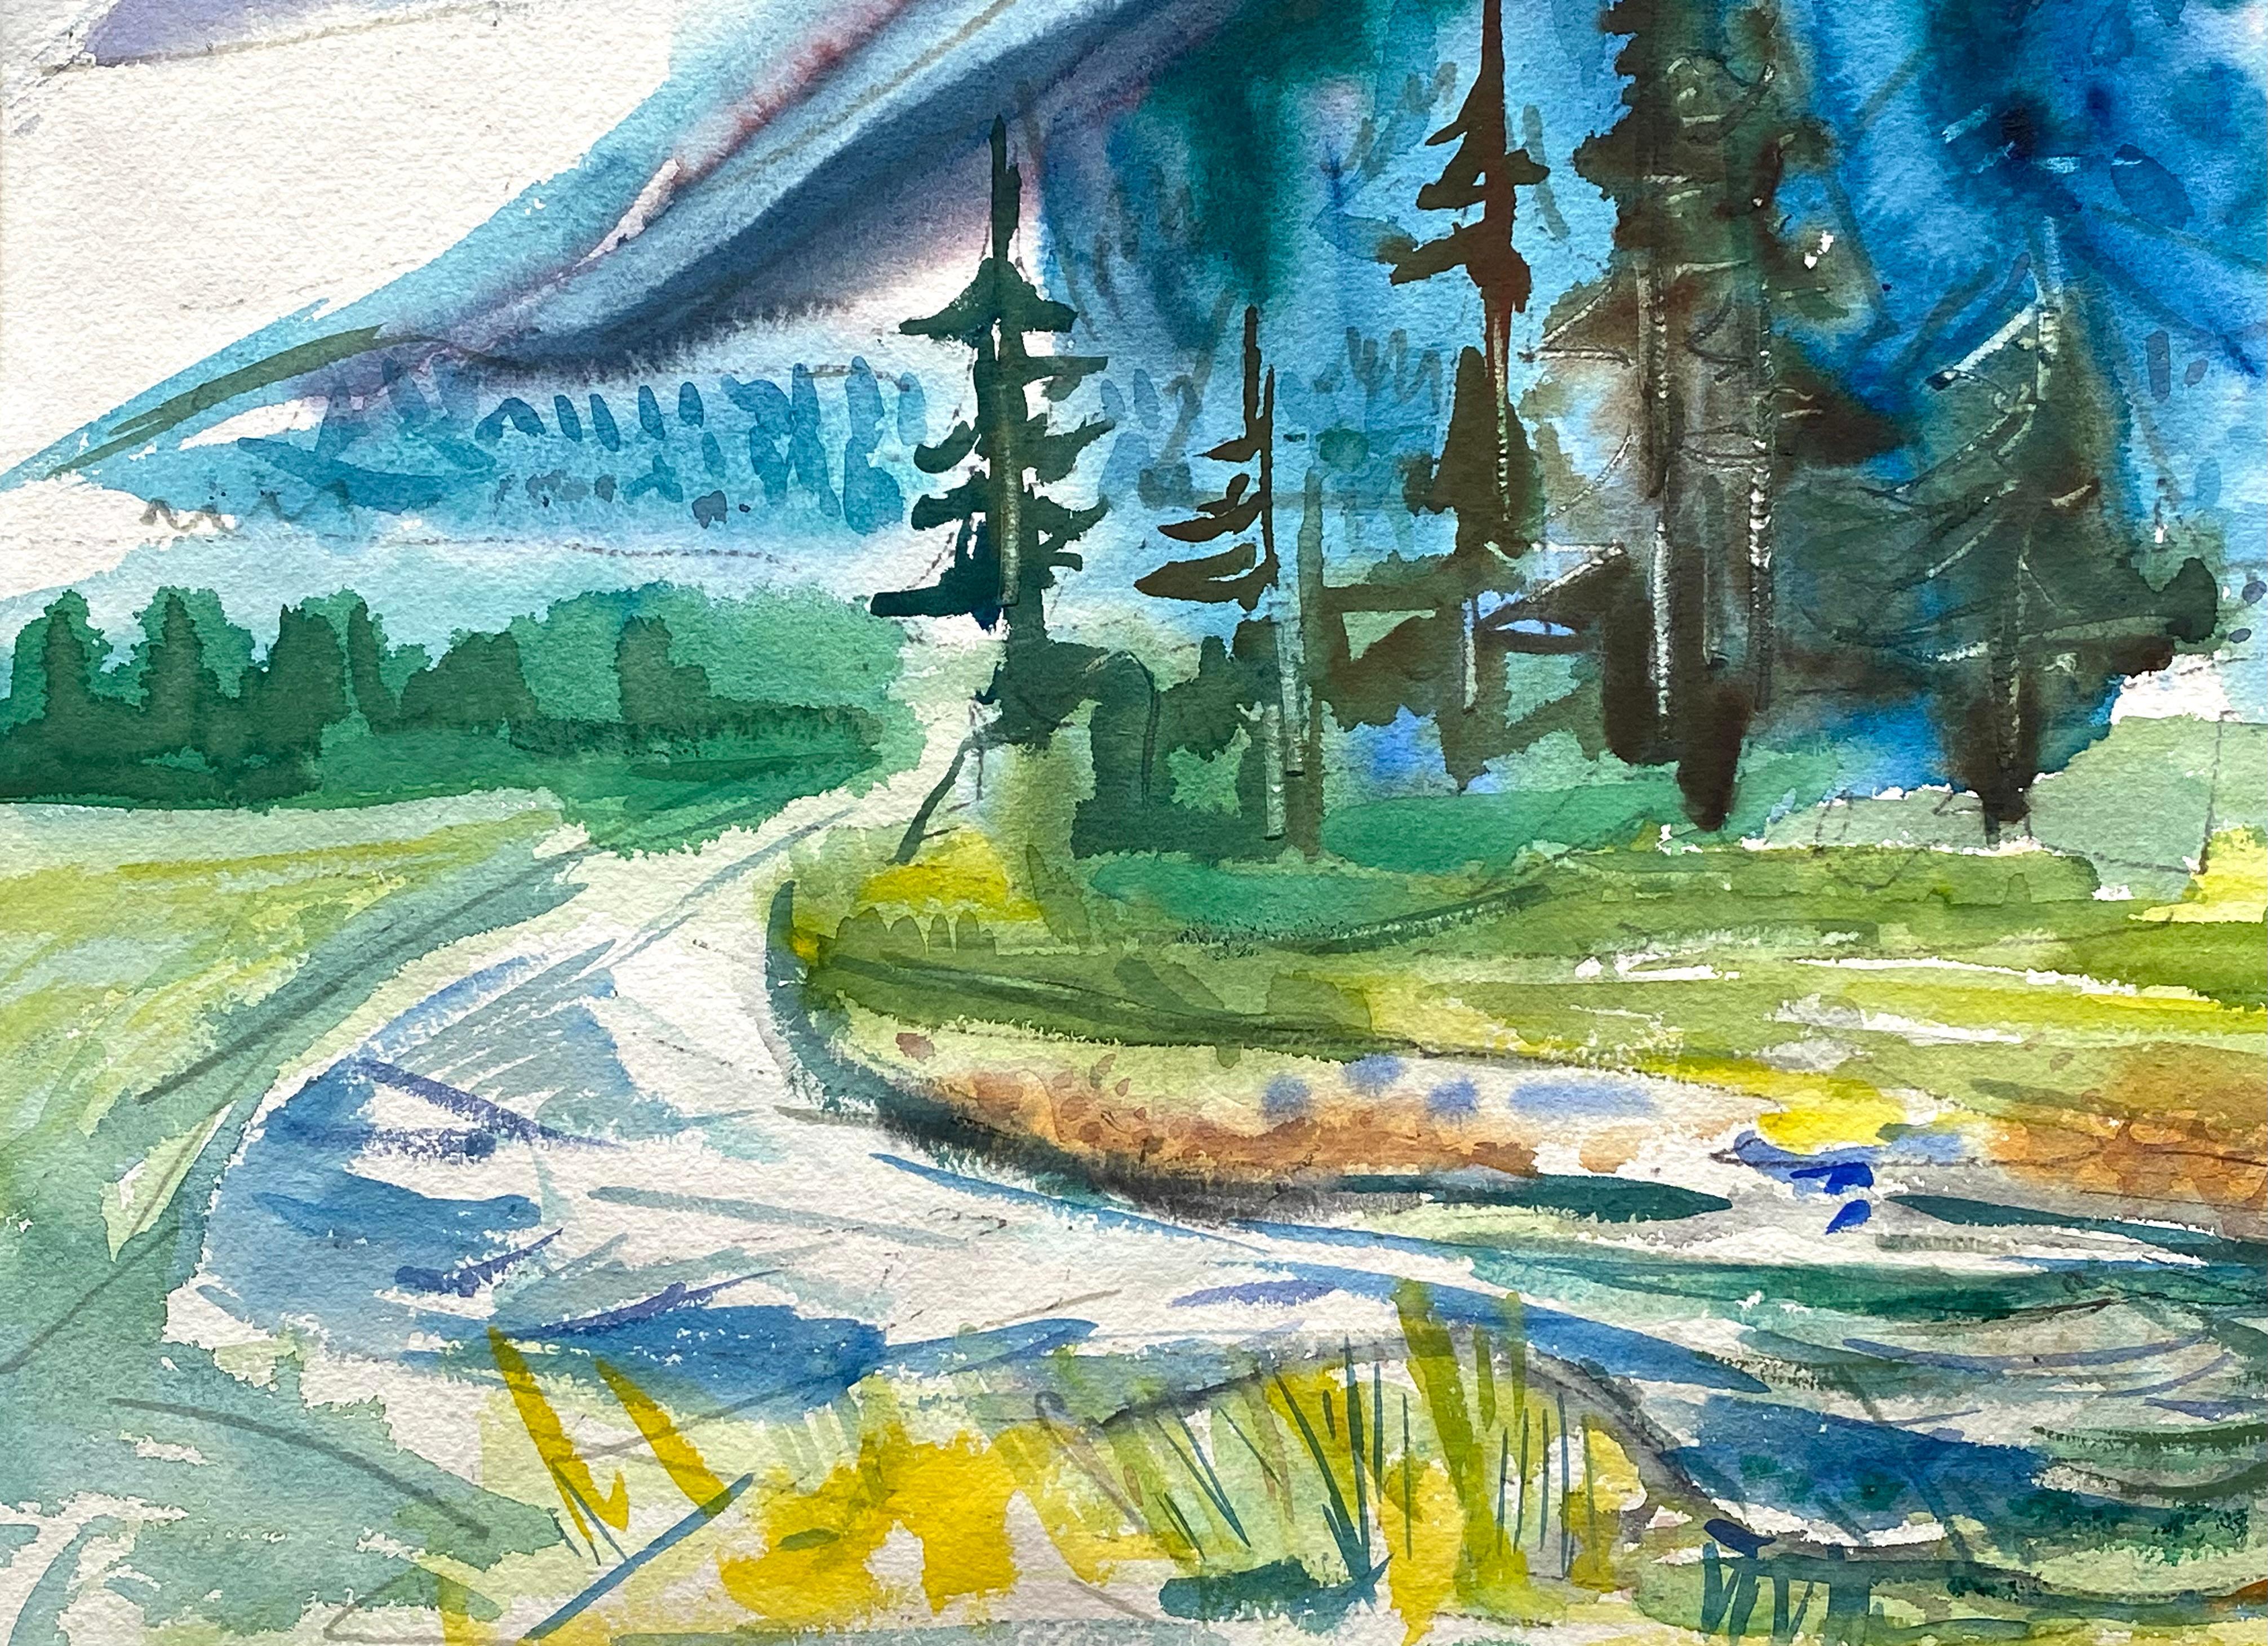 Original watercolor on archival paper of a Rocky Mountain Meadow by the well known American artist, Werner Drewes.  Signed lower right.  Titled and dated 1956 on verso of sheet.  Condition is very good. Colors are bold and vivid.  Sheet size is 20